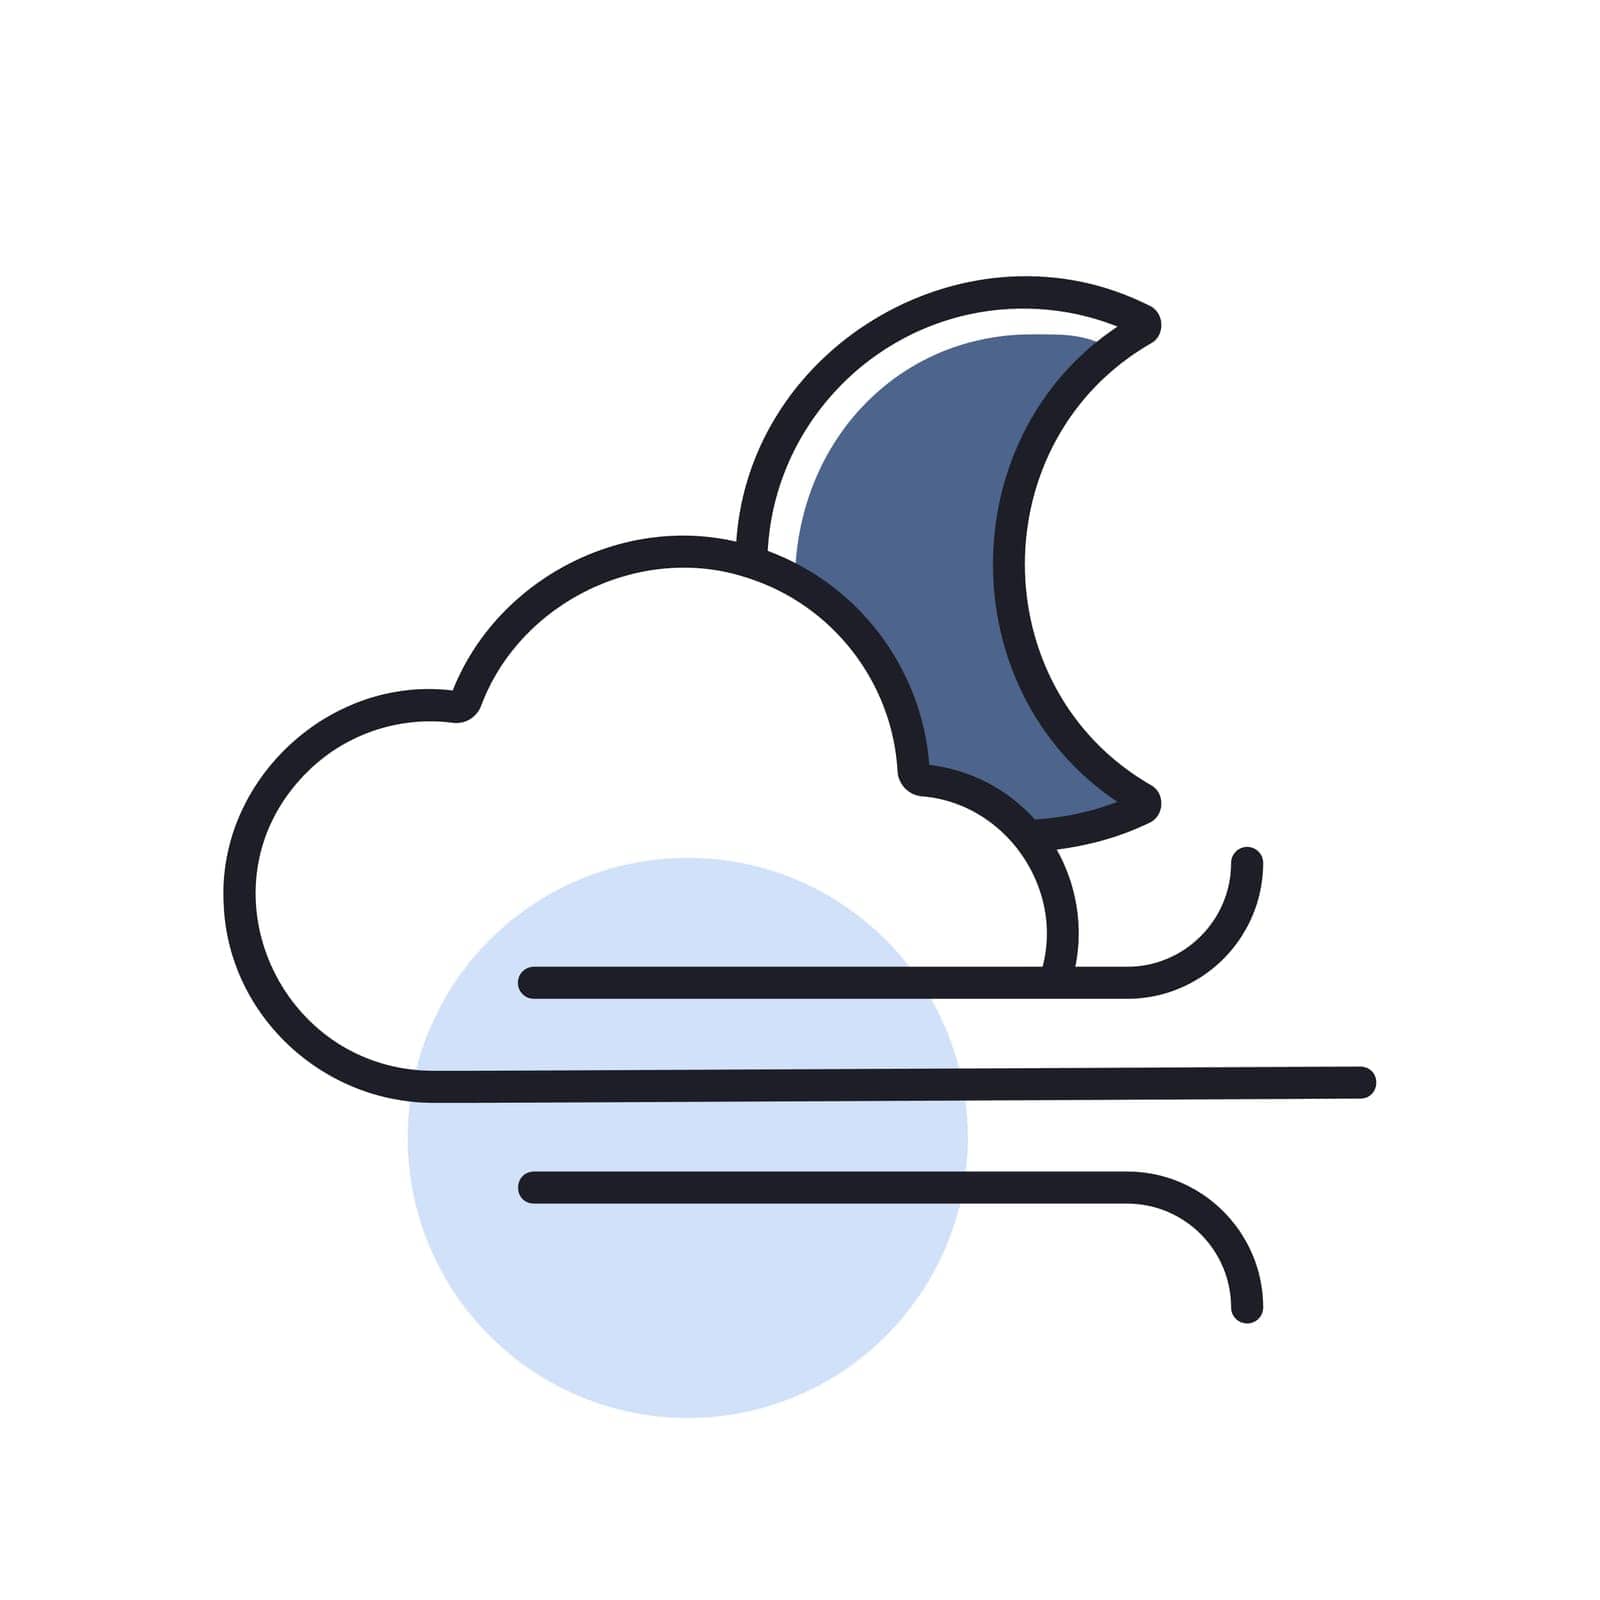 Moon cloudy and wind vector icon. Meteorology sign. Graph symbol for travel, tourism and weather web site and apps design, logo, app, UI